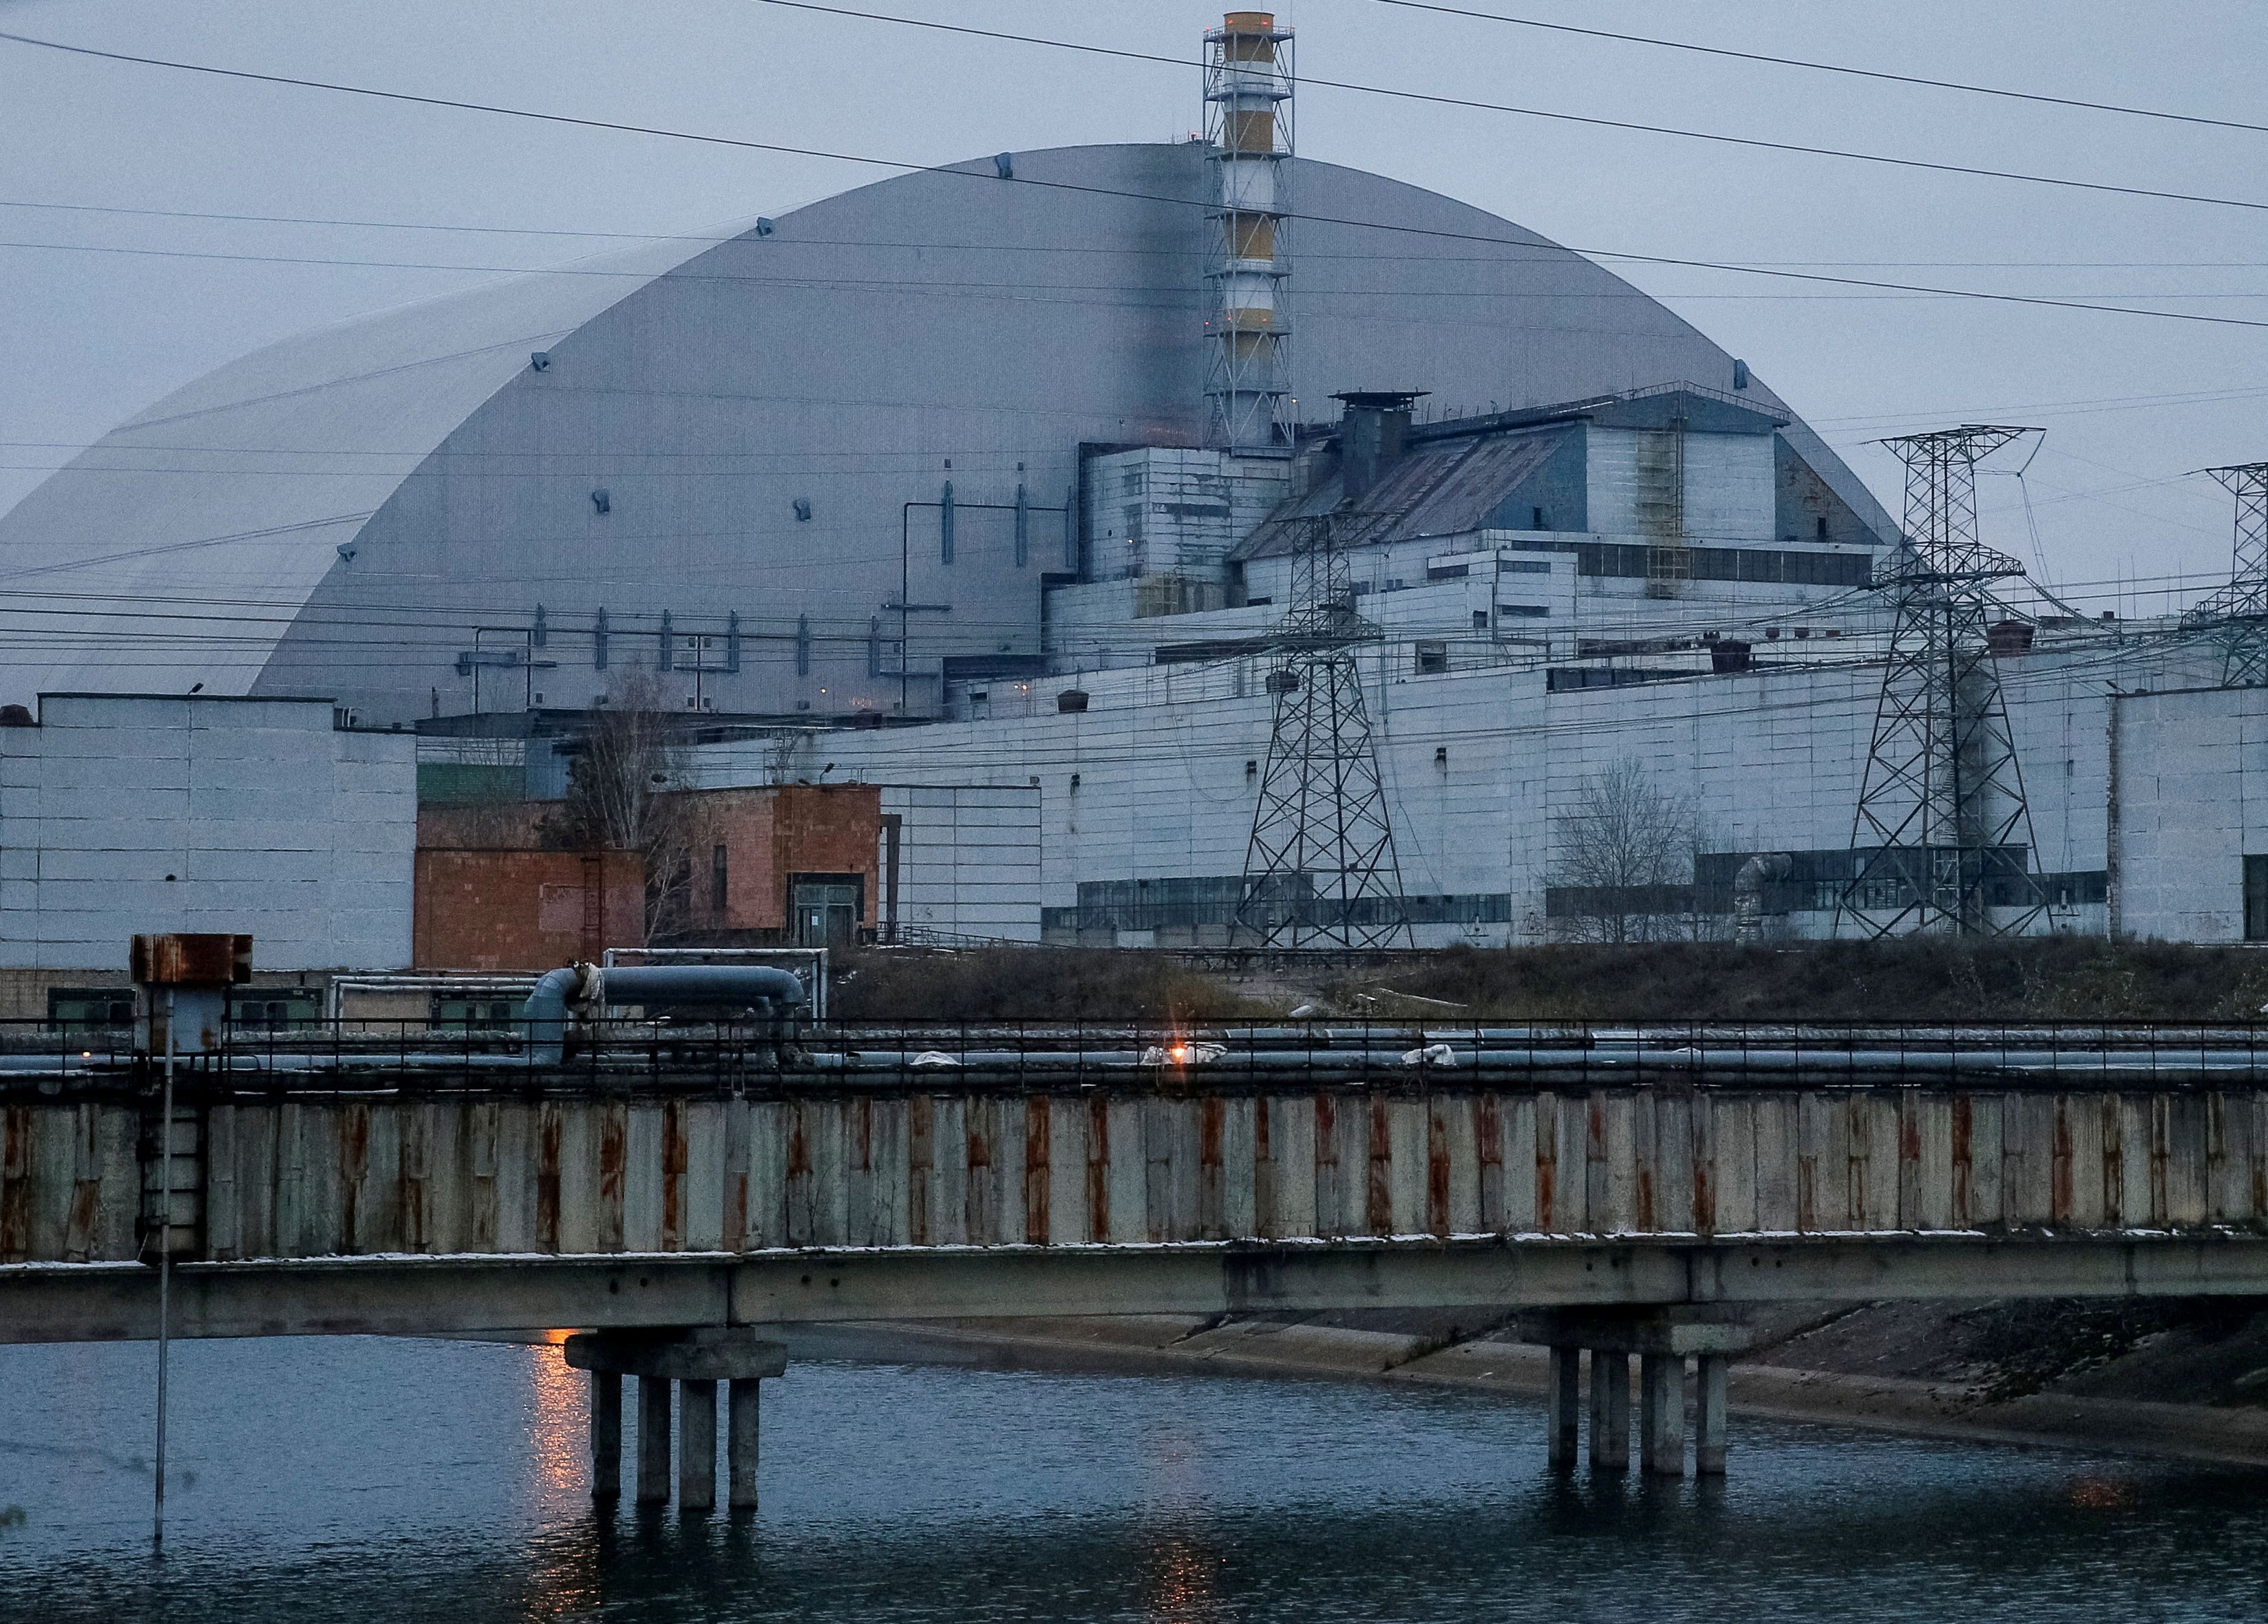 A general view shows the New Safe Confinement structure over the old sarcophagus covering the damaged fourth reactor at the Chernobyl Nuclear Power Plant, in Chernobyl